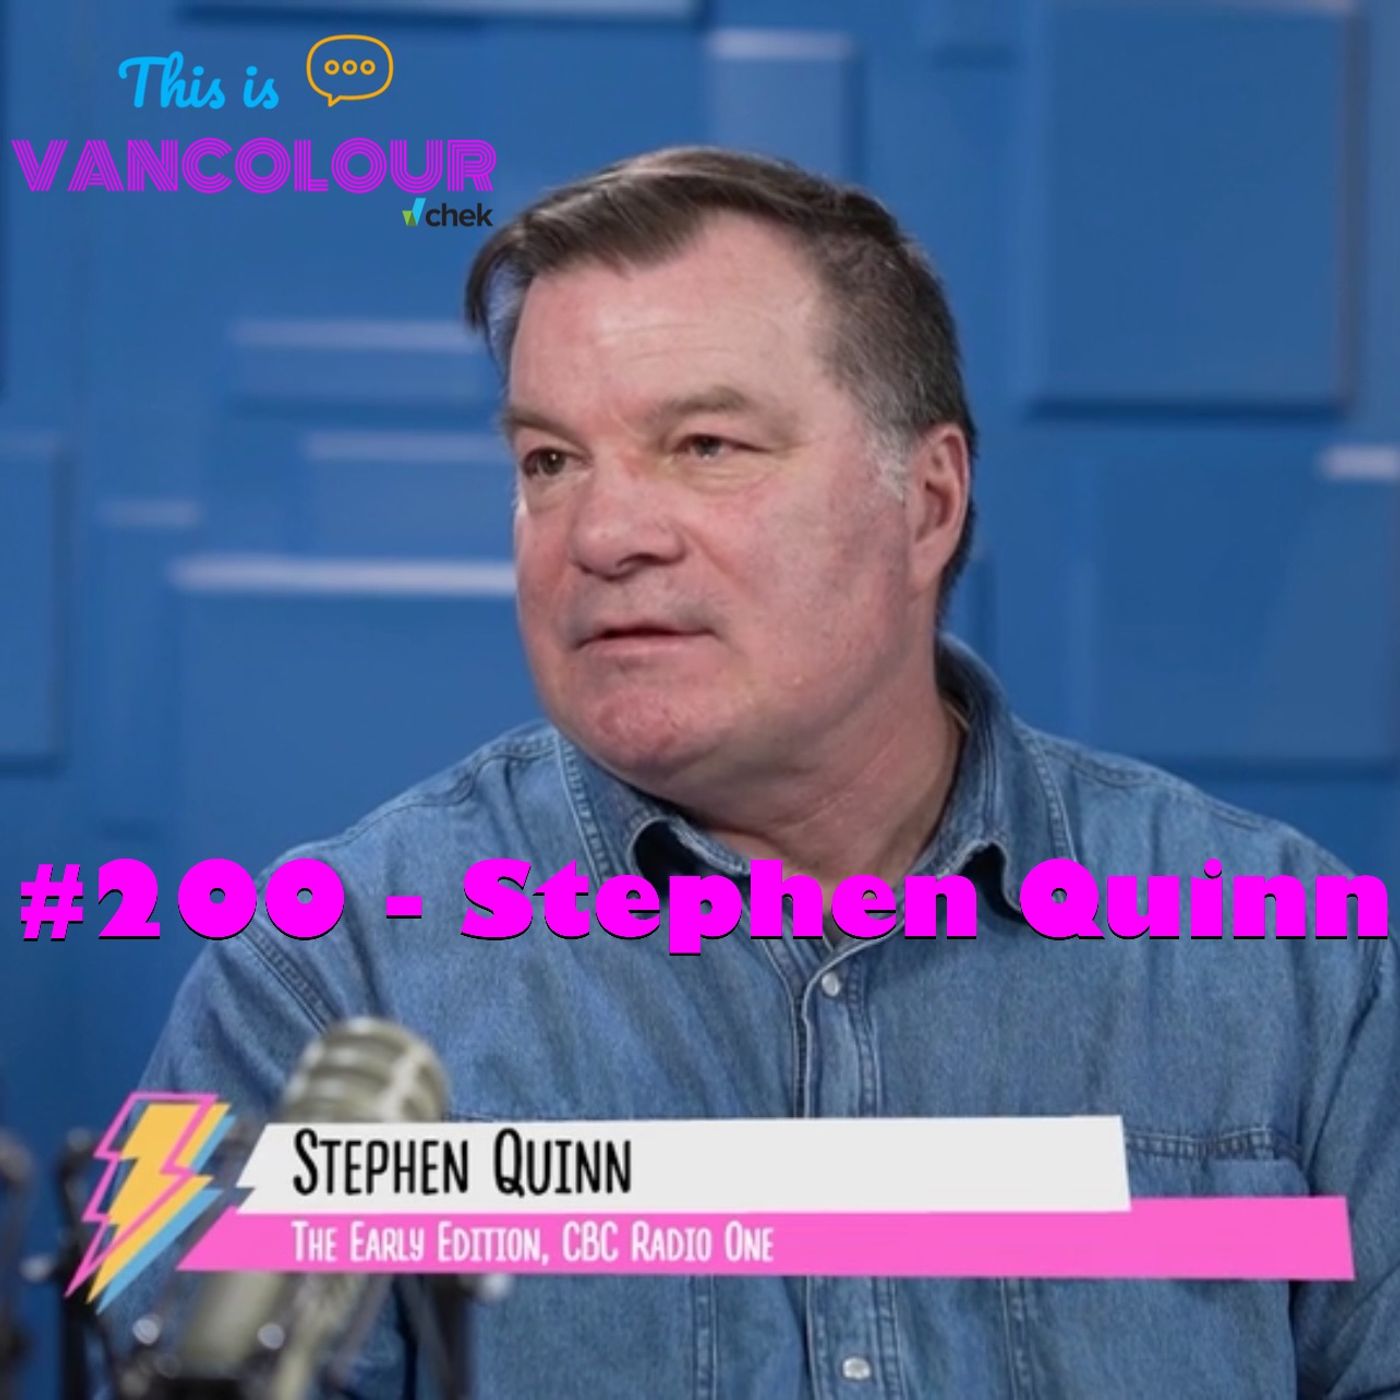 #200 - Stephen Quinn (CBC's The Early Edition)